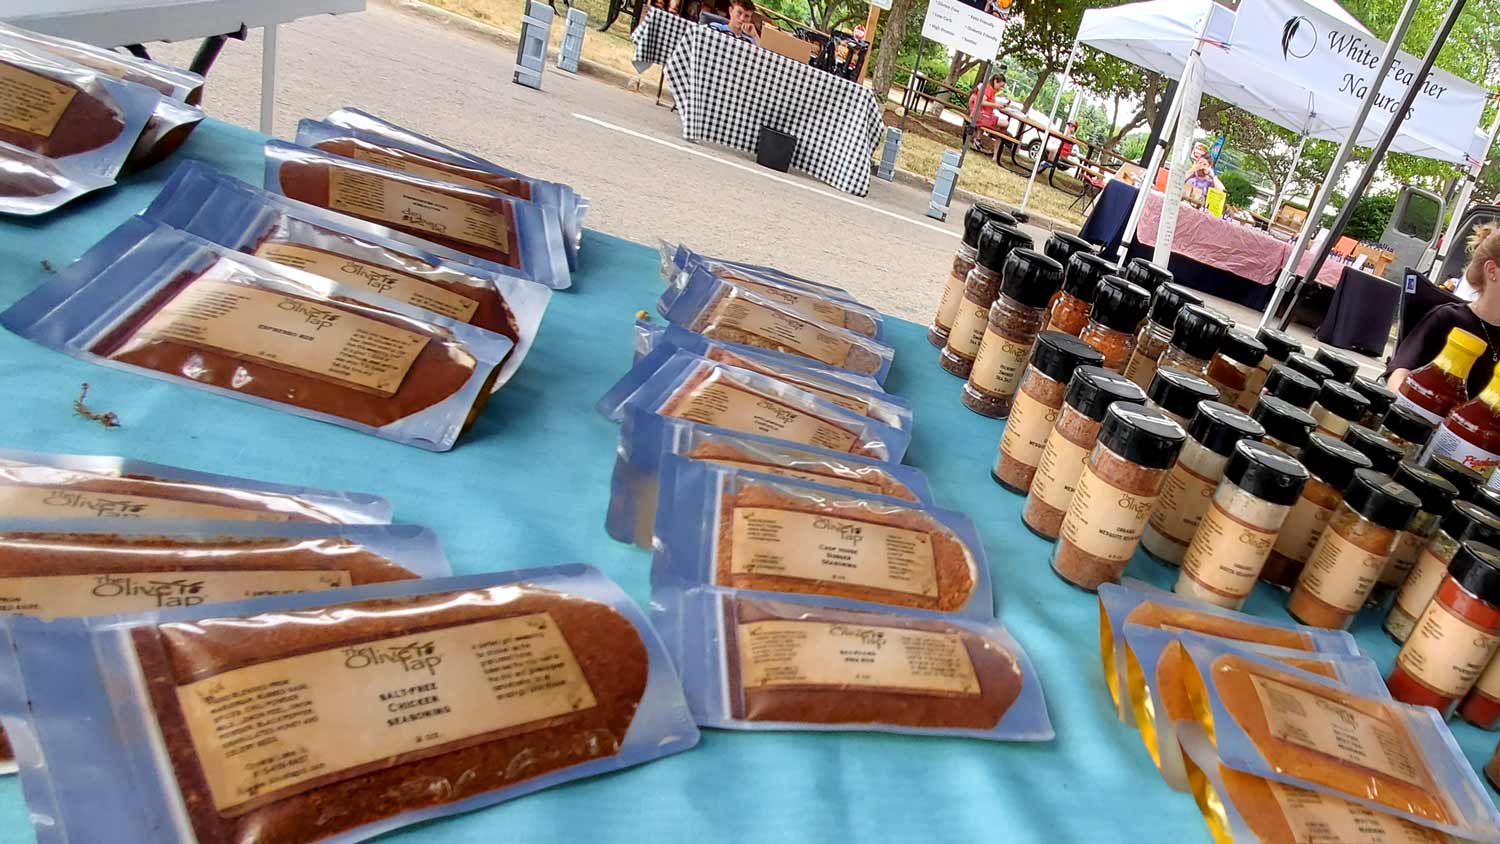 The Olive Tap seasonings and spices at the Downtown Crystal Lake Farmers Market.